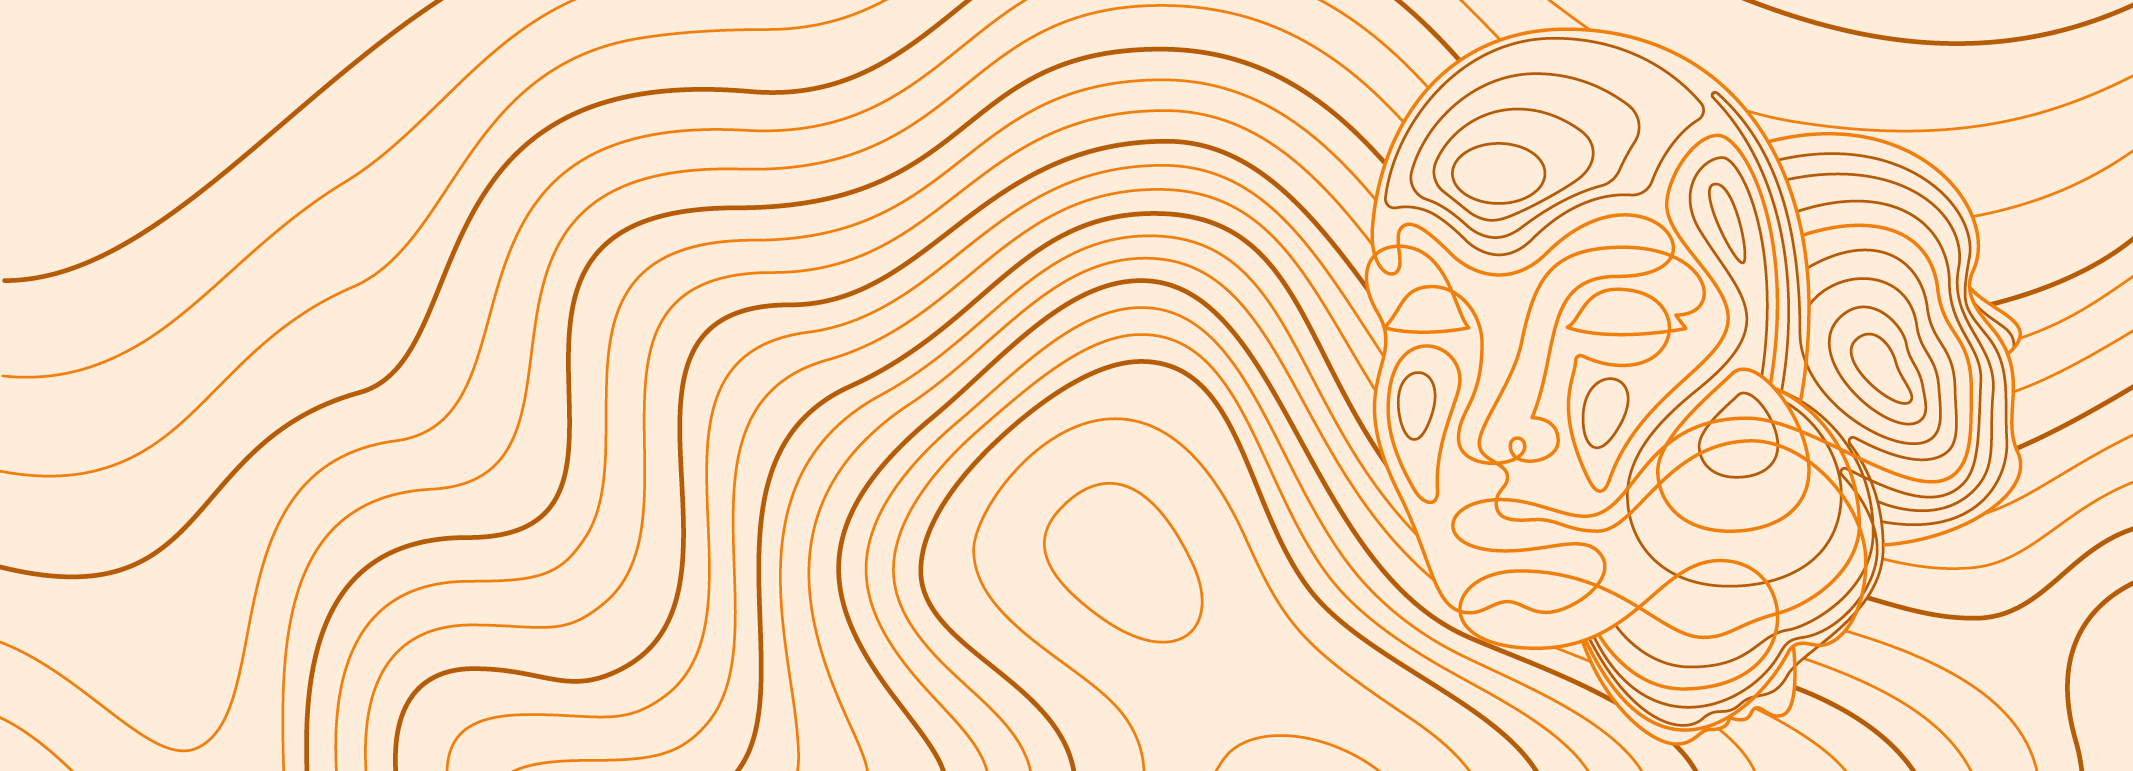 A graphic image with swirling lines that form a face to the right.